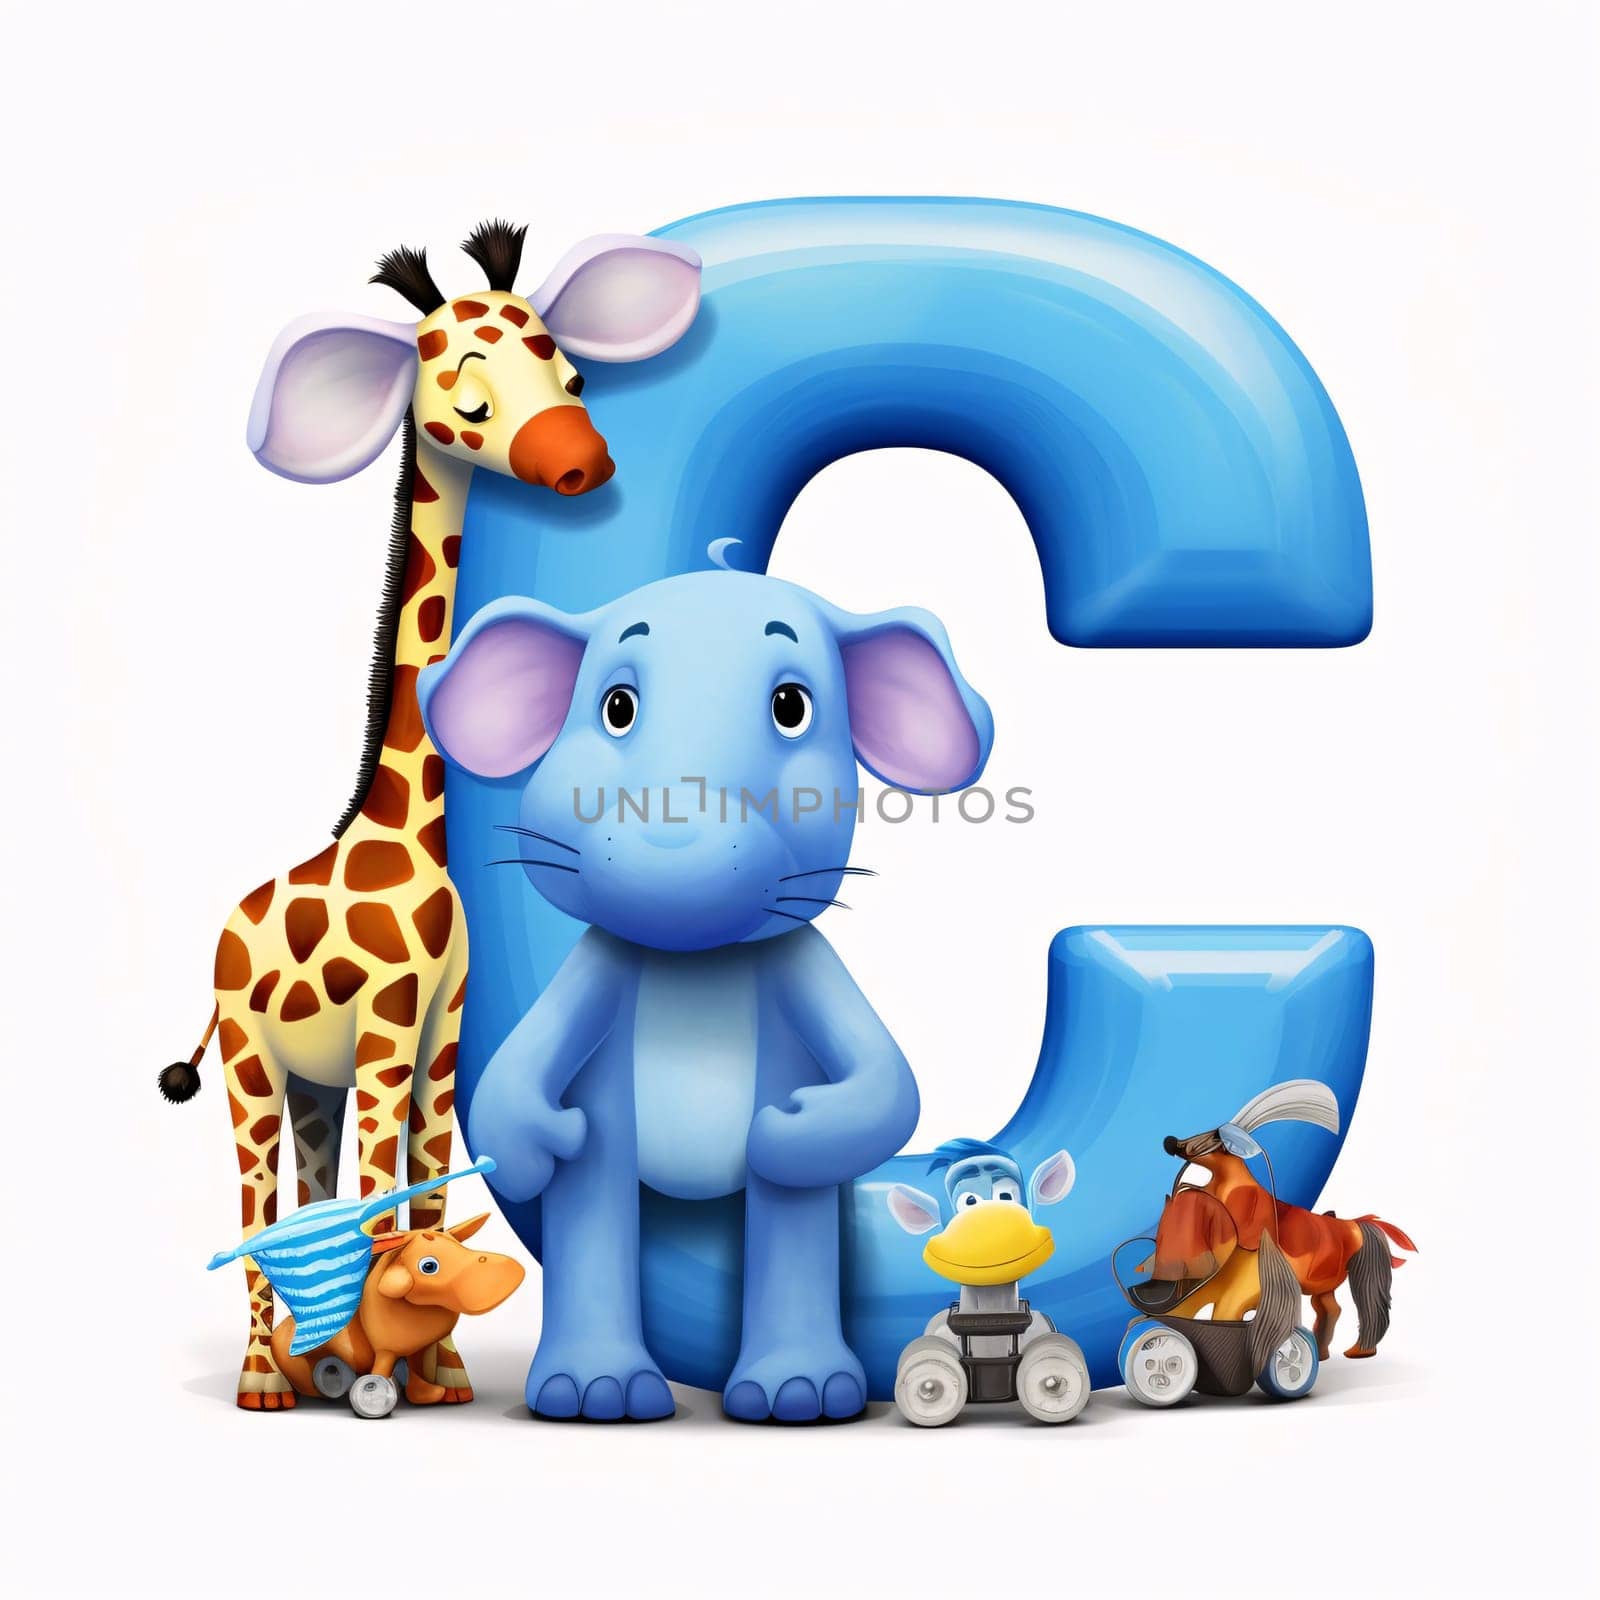 Graphic alphabet letters: 3d Render of Cartoon animal character with 3d letter C